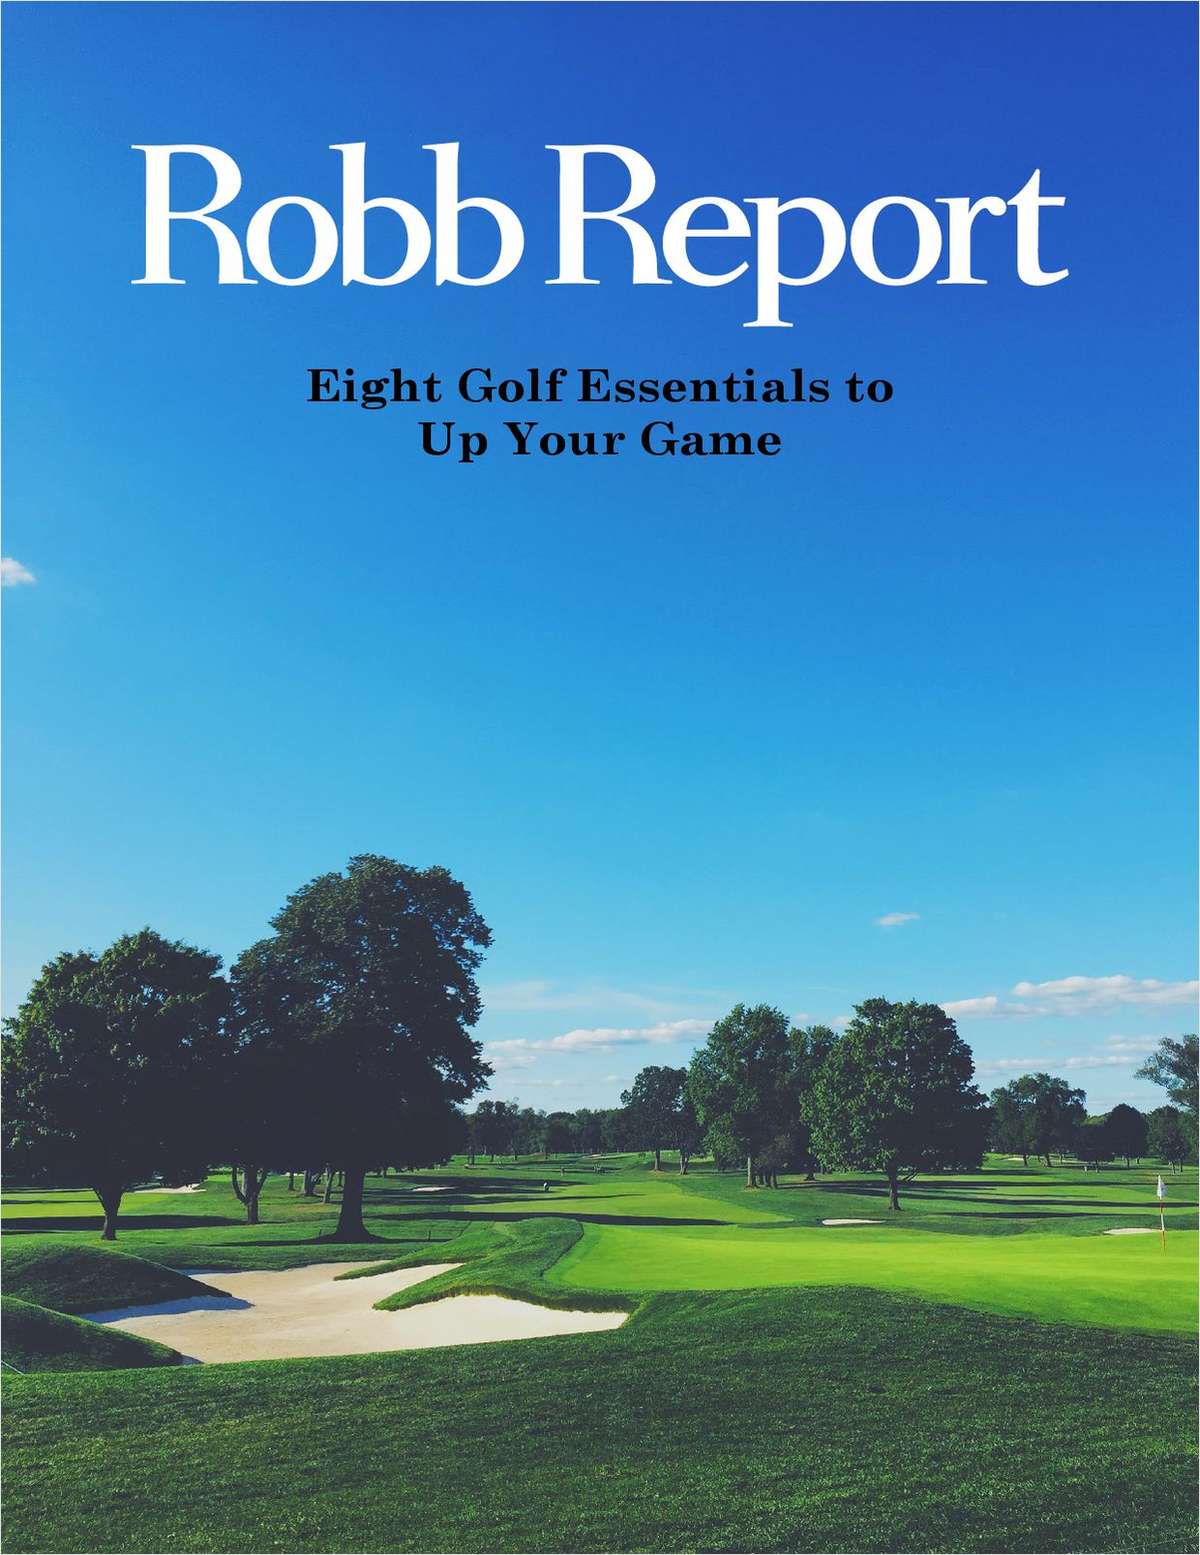 Eight Golf Essentials to Up Your Game